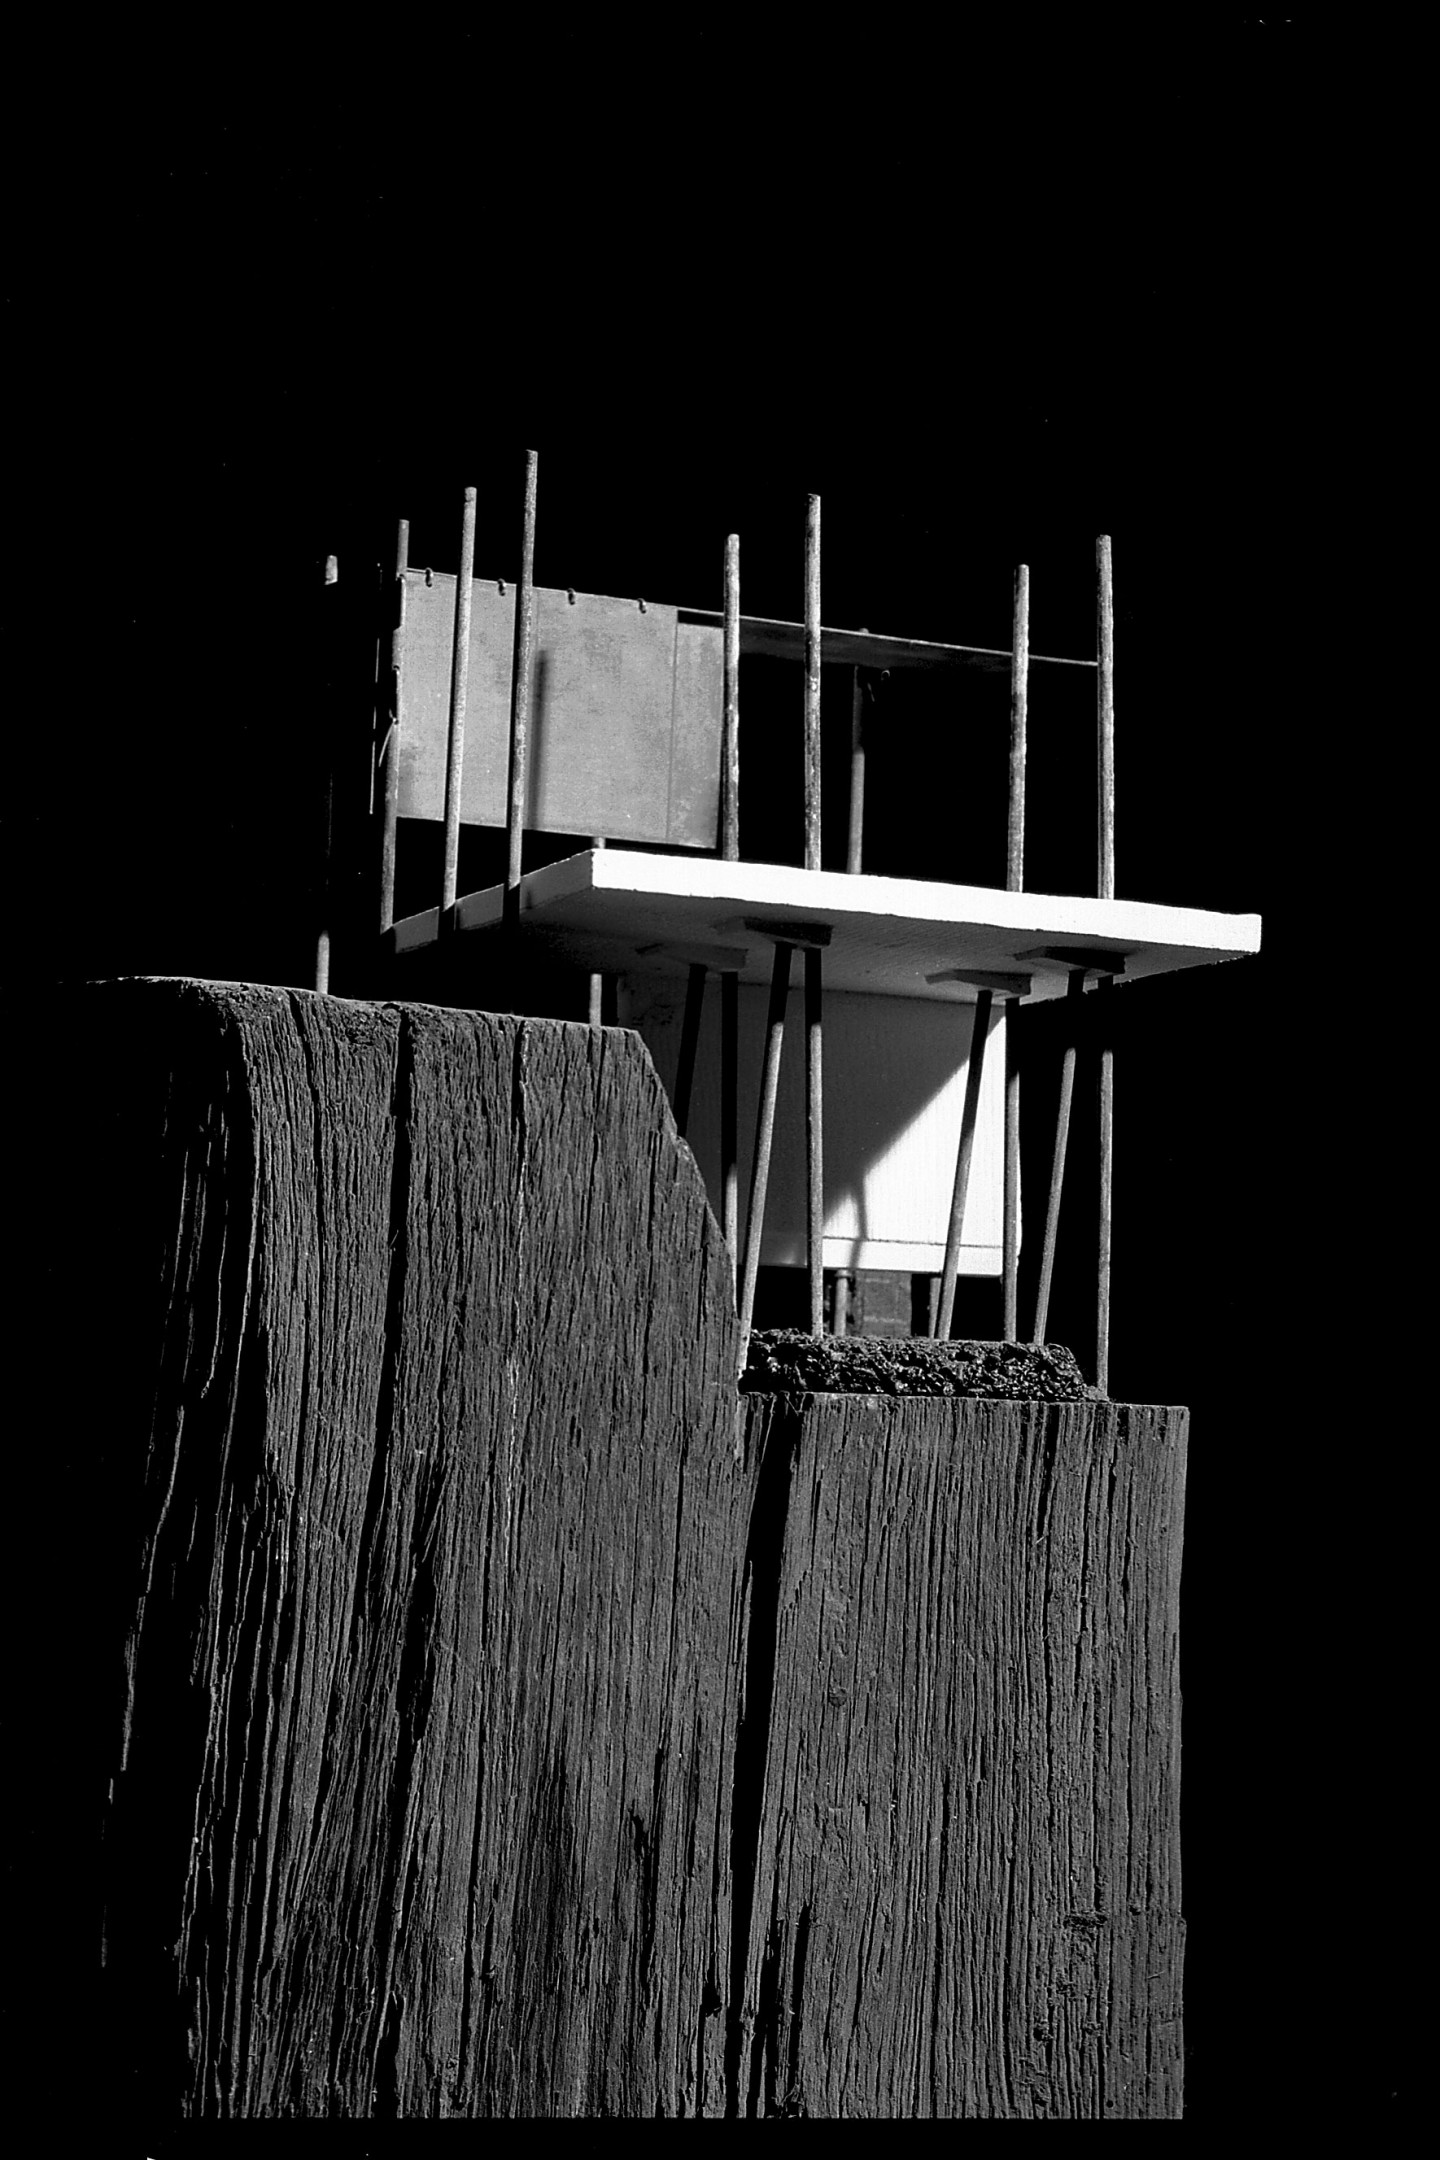 Model Study of Spatial and tectonic potentials by Gomes + Staub Architects, made from weathered timber, copper wire, foamboard, gypsum plaster and asphalt.